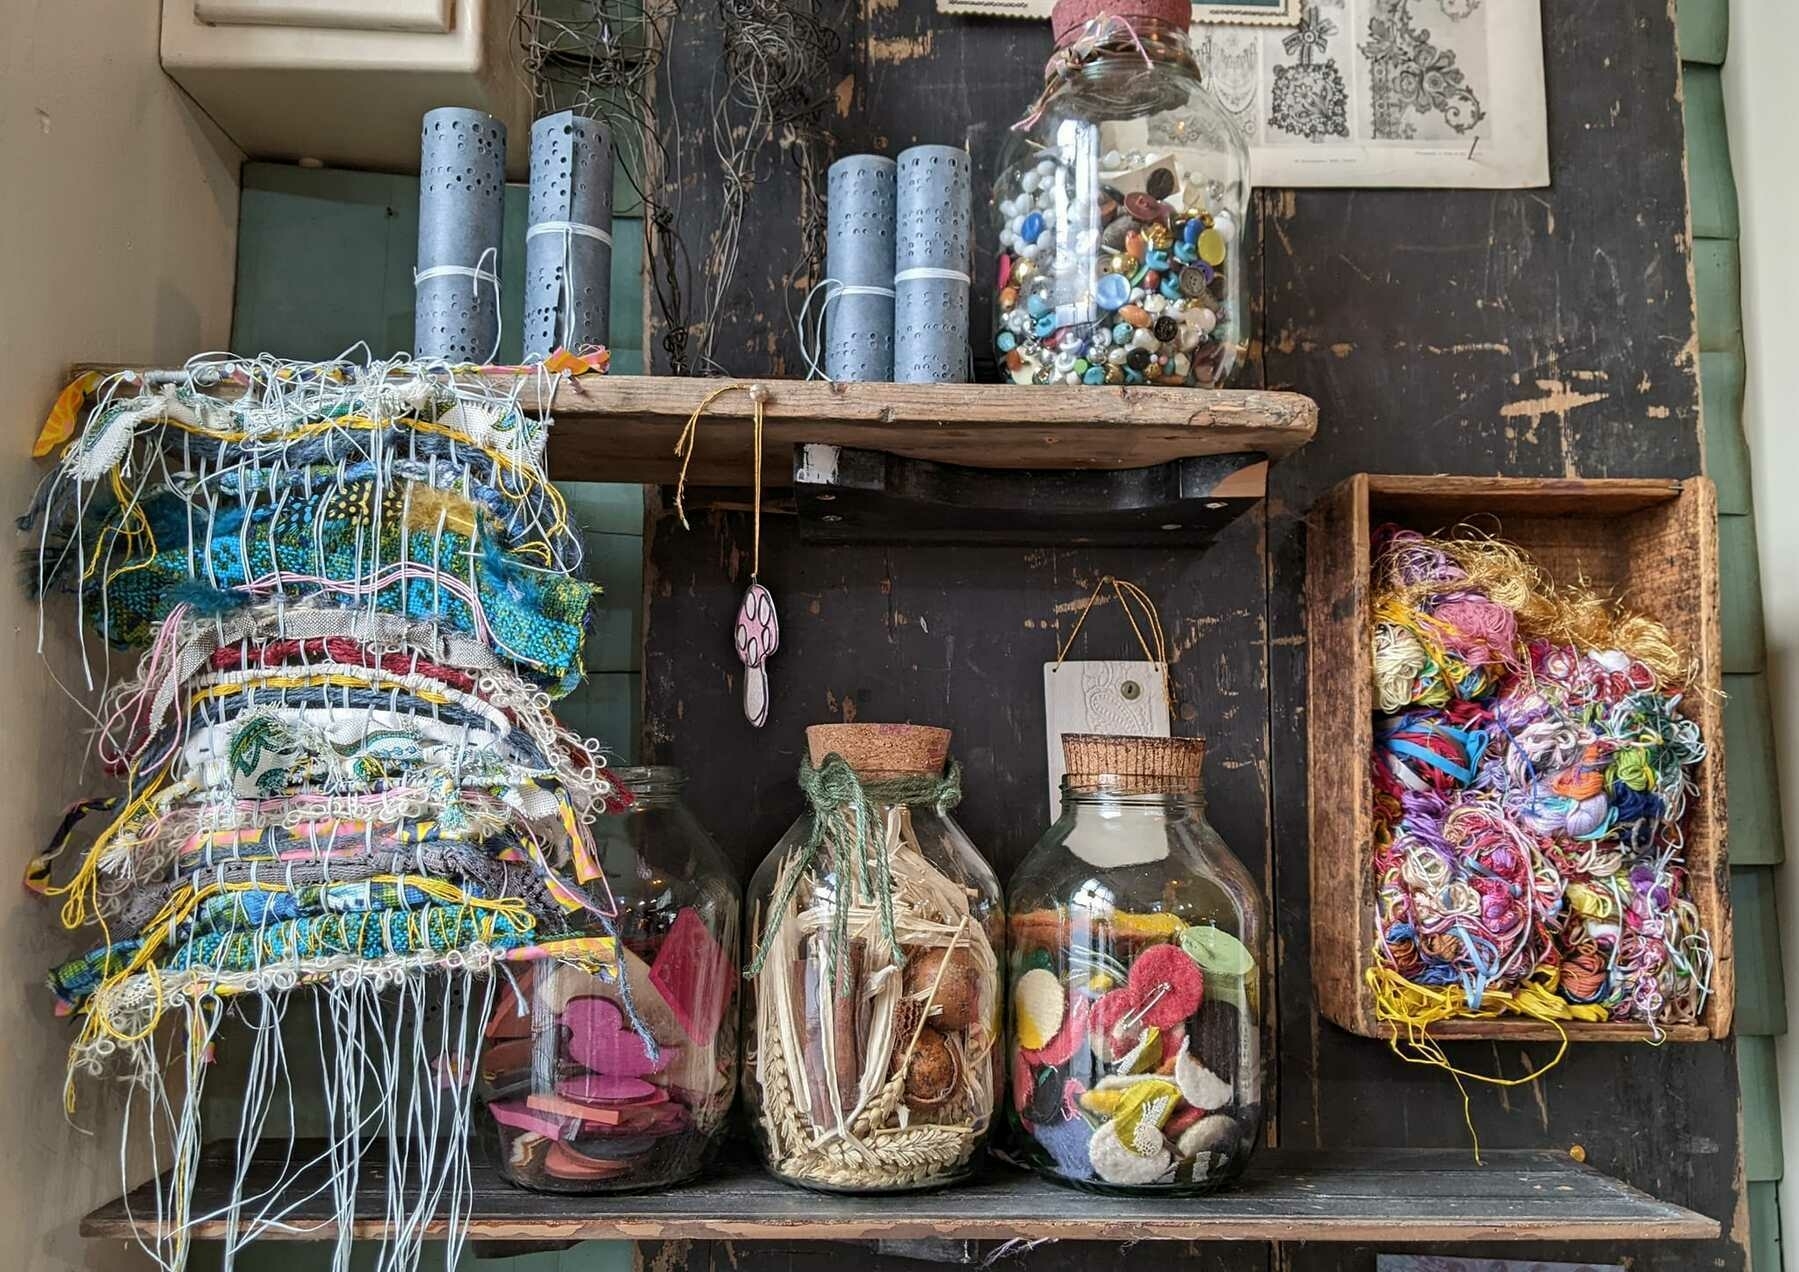 A pile of fabric scraps with lose hanging threads, a shelf holding jars of buttons and felt decorations for sewing